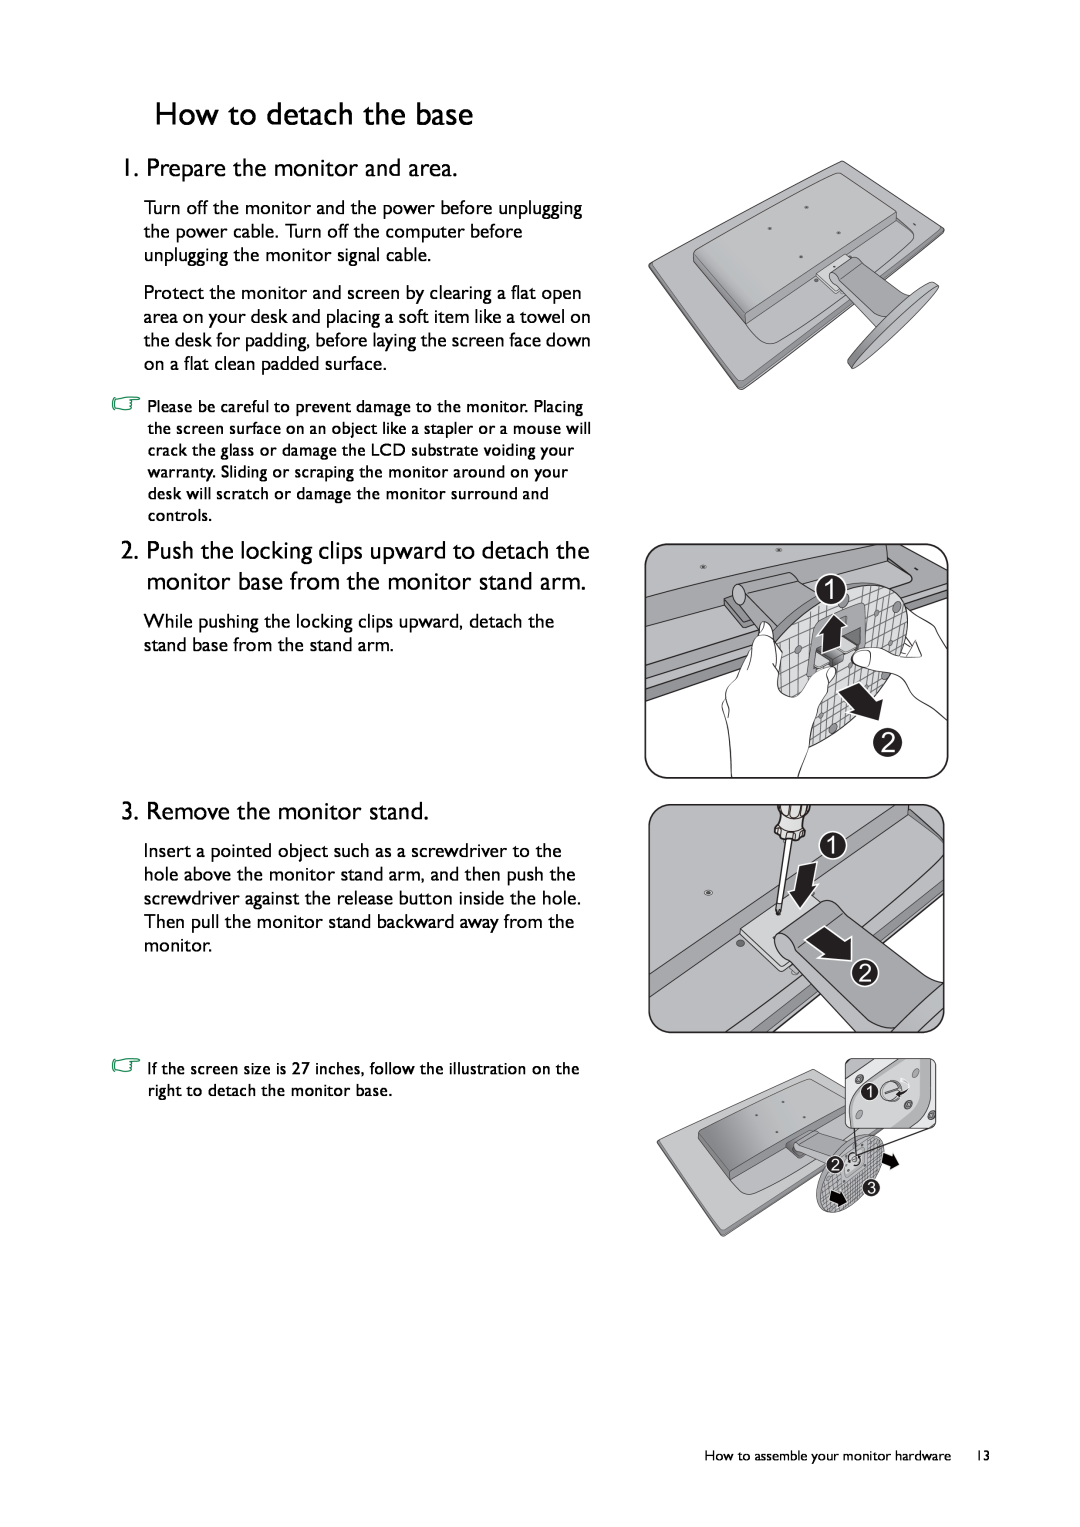 BenQ GW2255, GW2750HM, GW2450 user manual How to detach the base, Prepare the monitor and area, Remove the monitor stand 